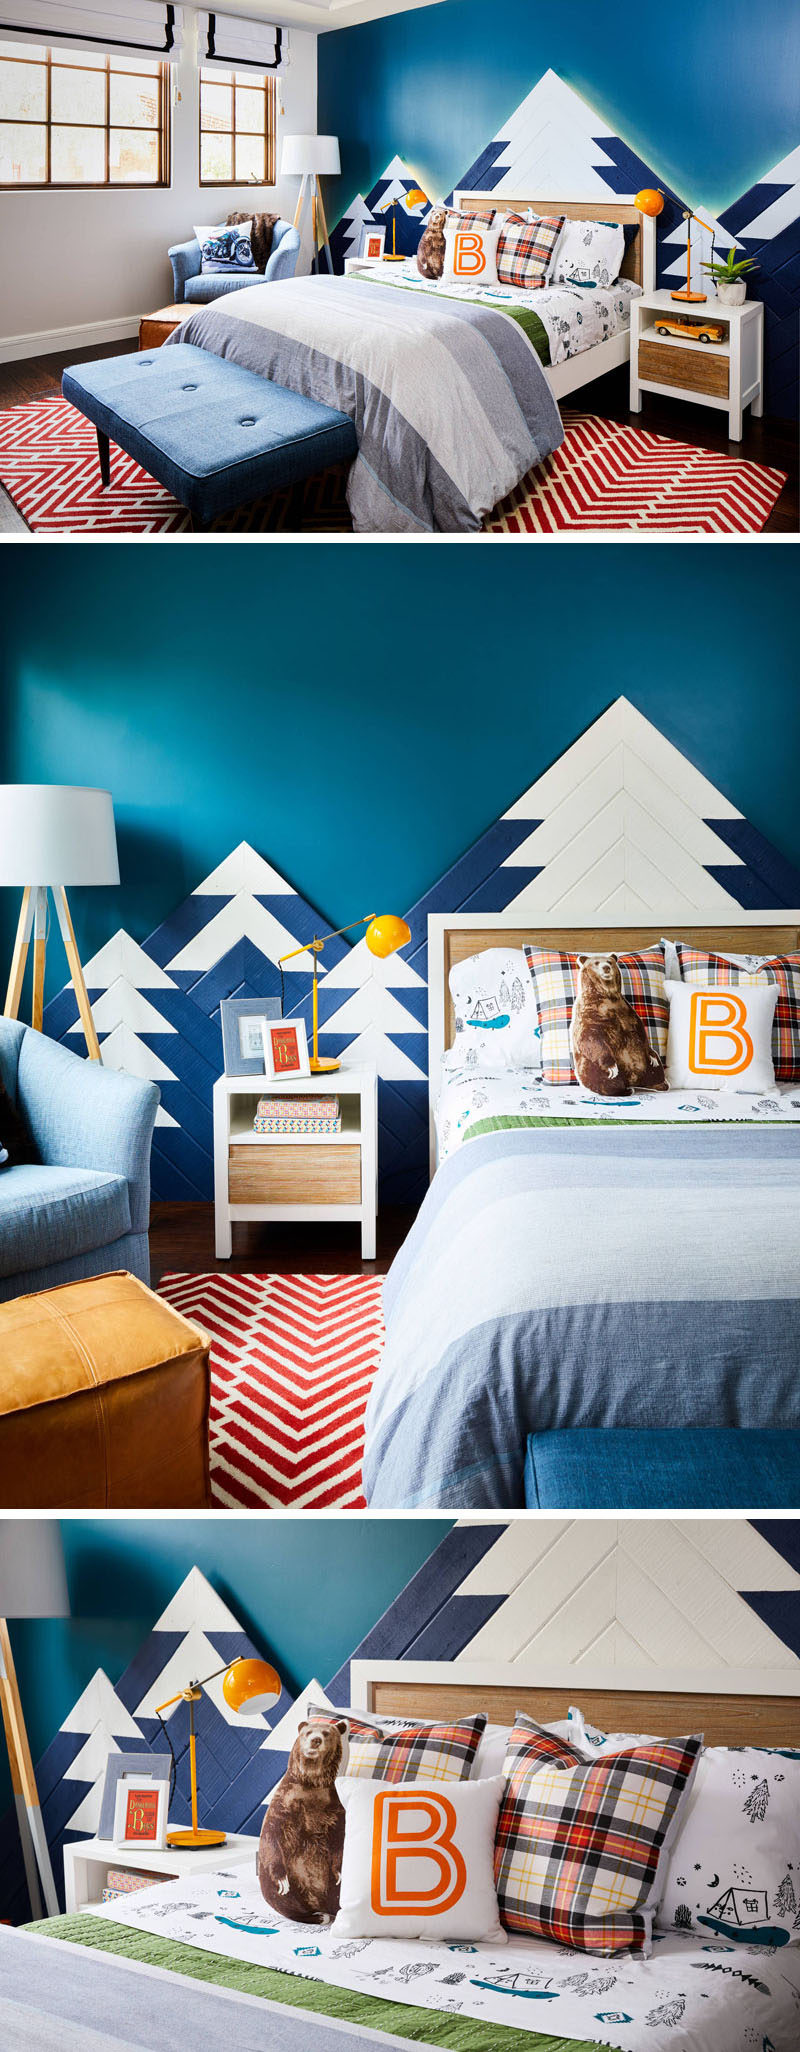 This kids bedroom design includes a mountain range as wall art, with hidden lighting that mimics the colors of the Northern Lights. 